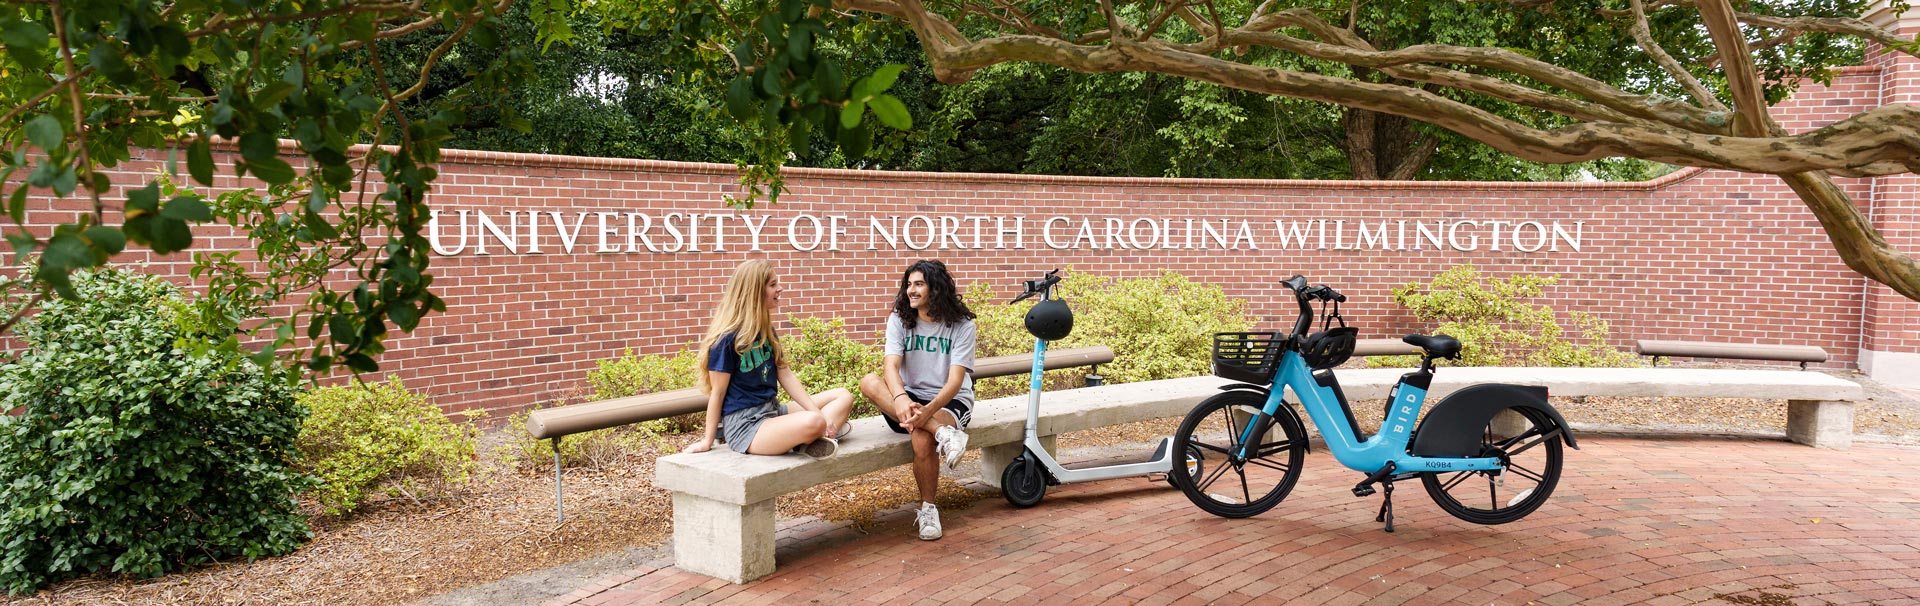 students with e-bike and scooter in front of the university entrance sign